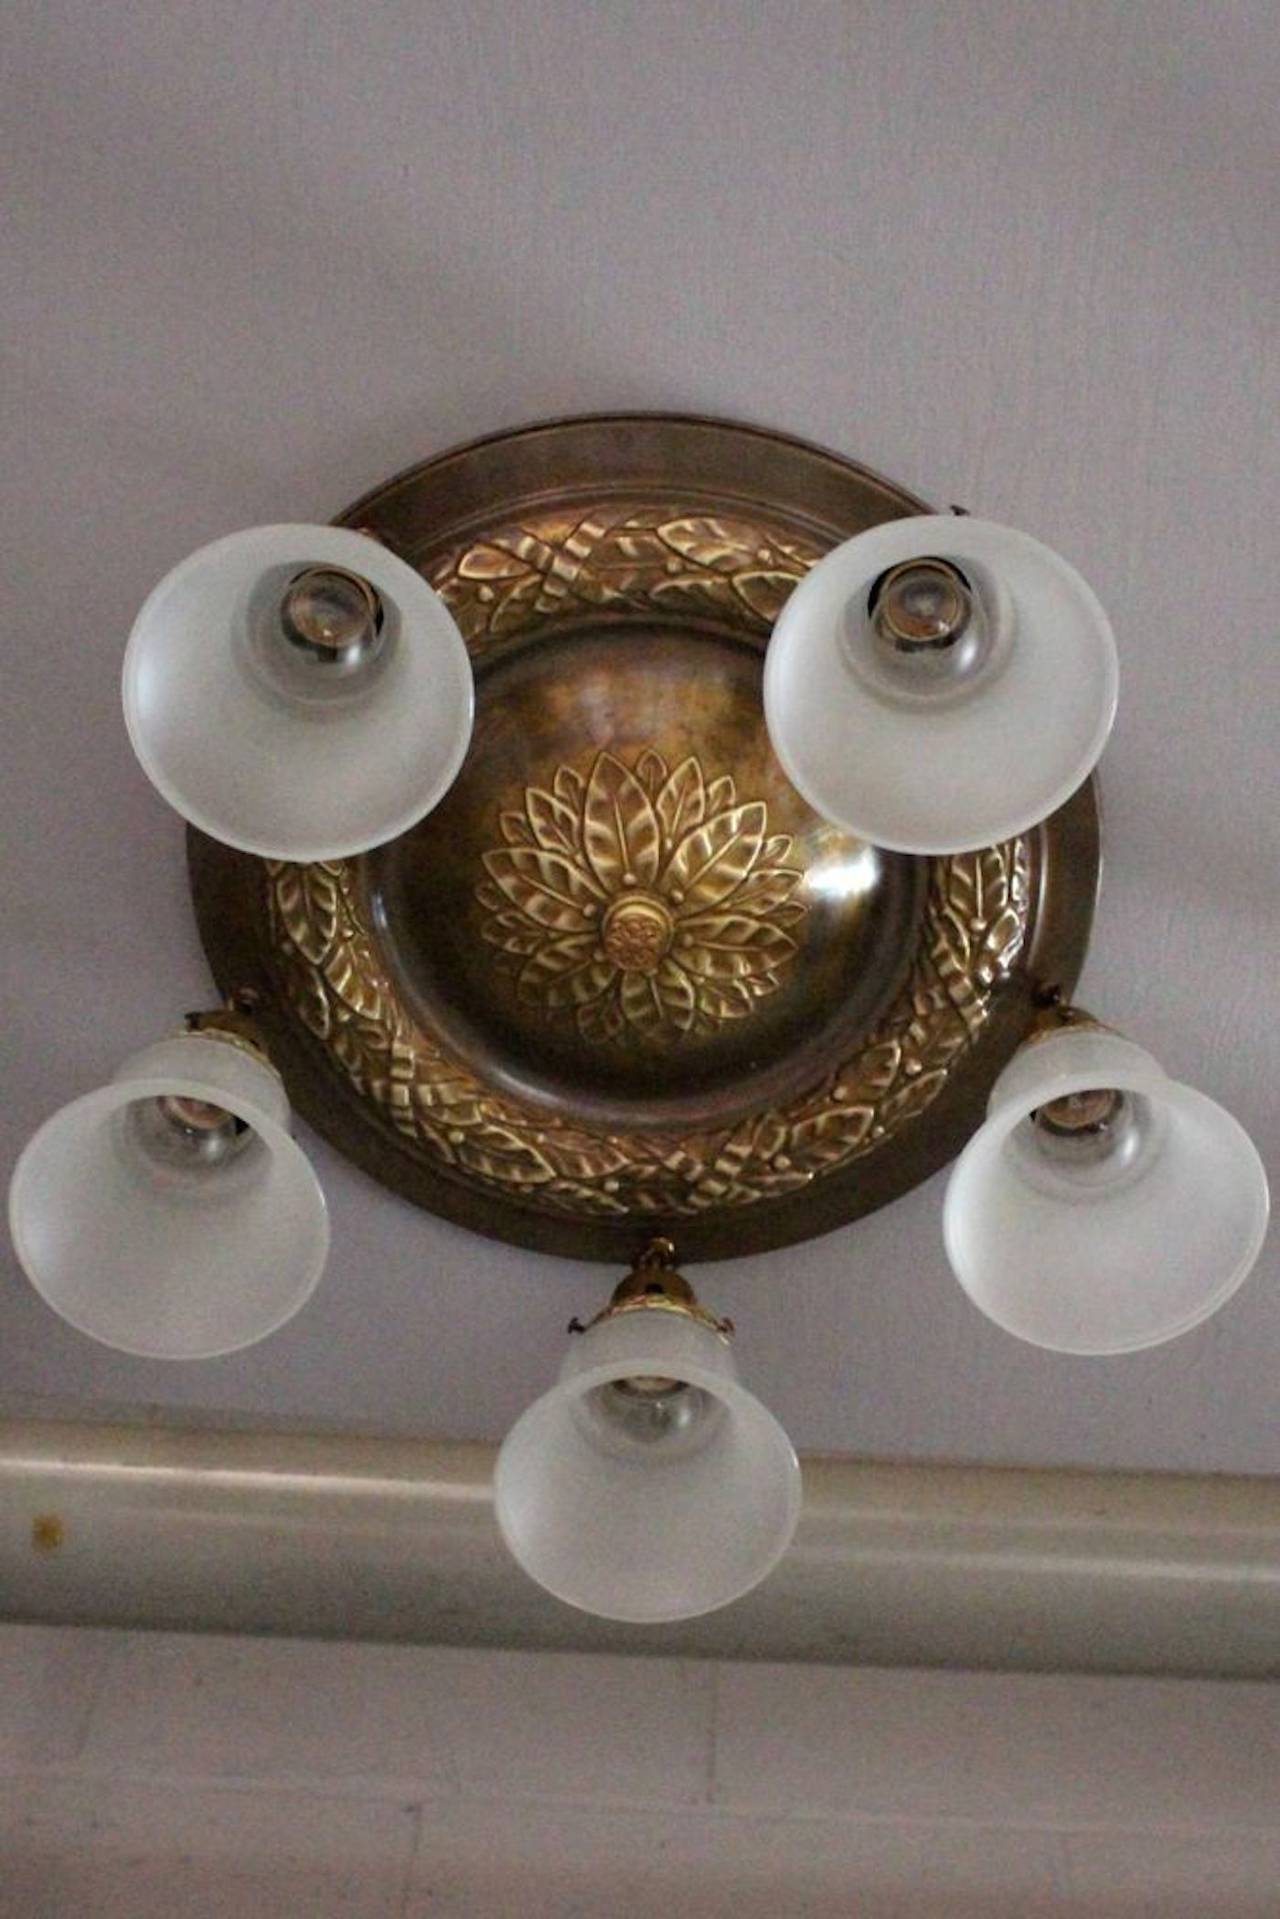 North American Classical Revival Style Five-Light Flush Mount